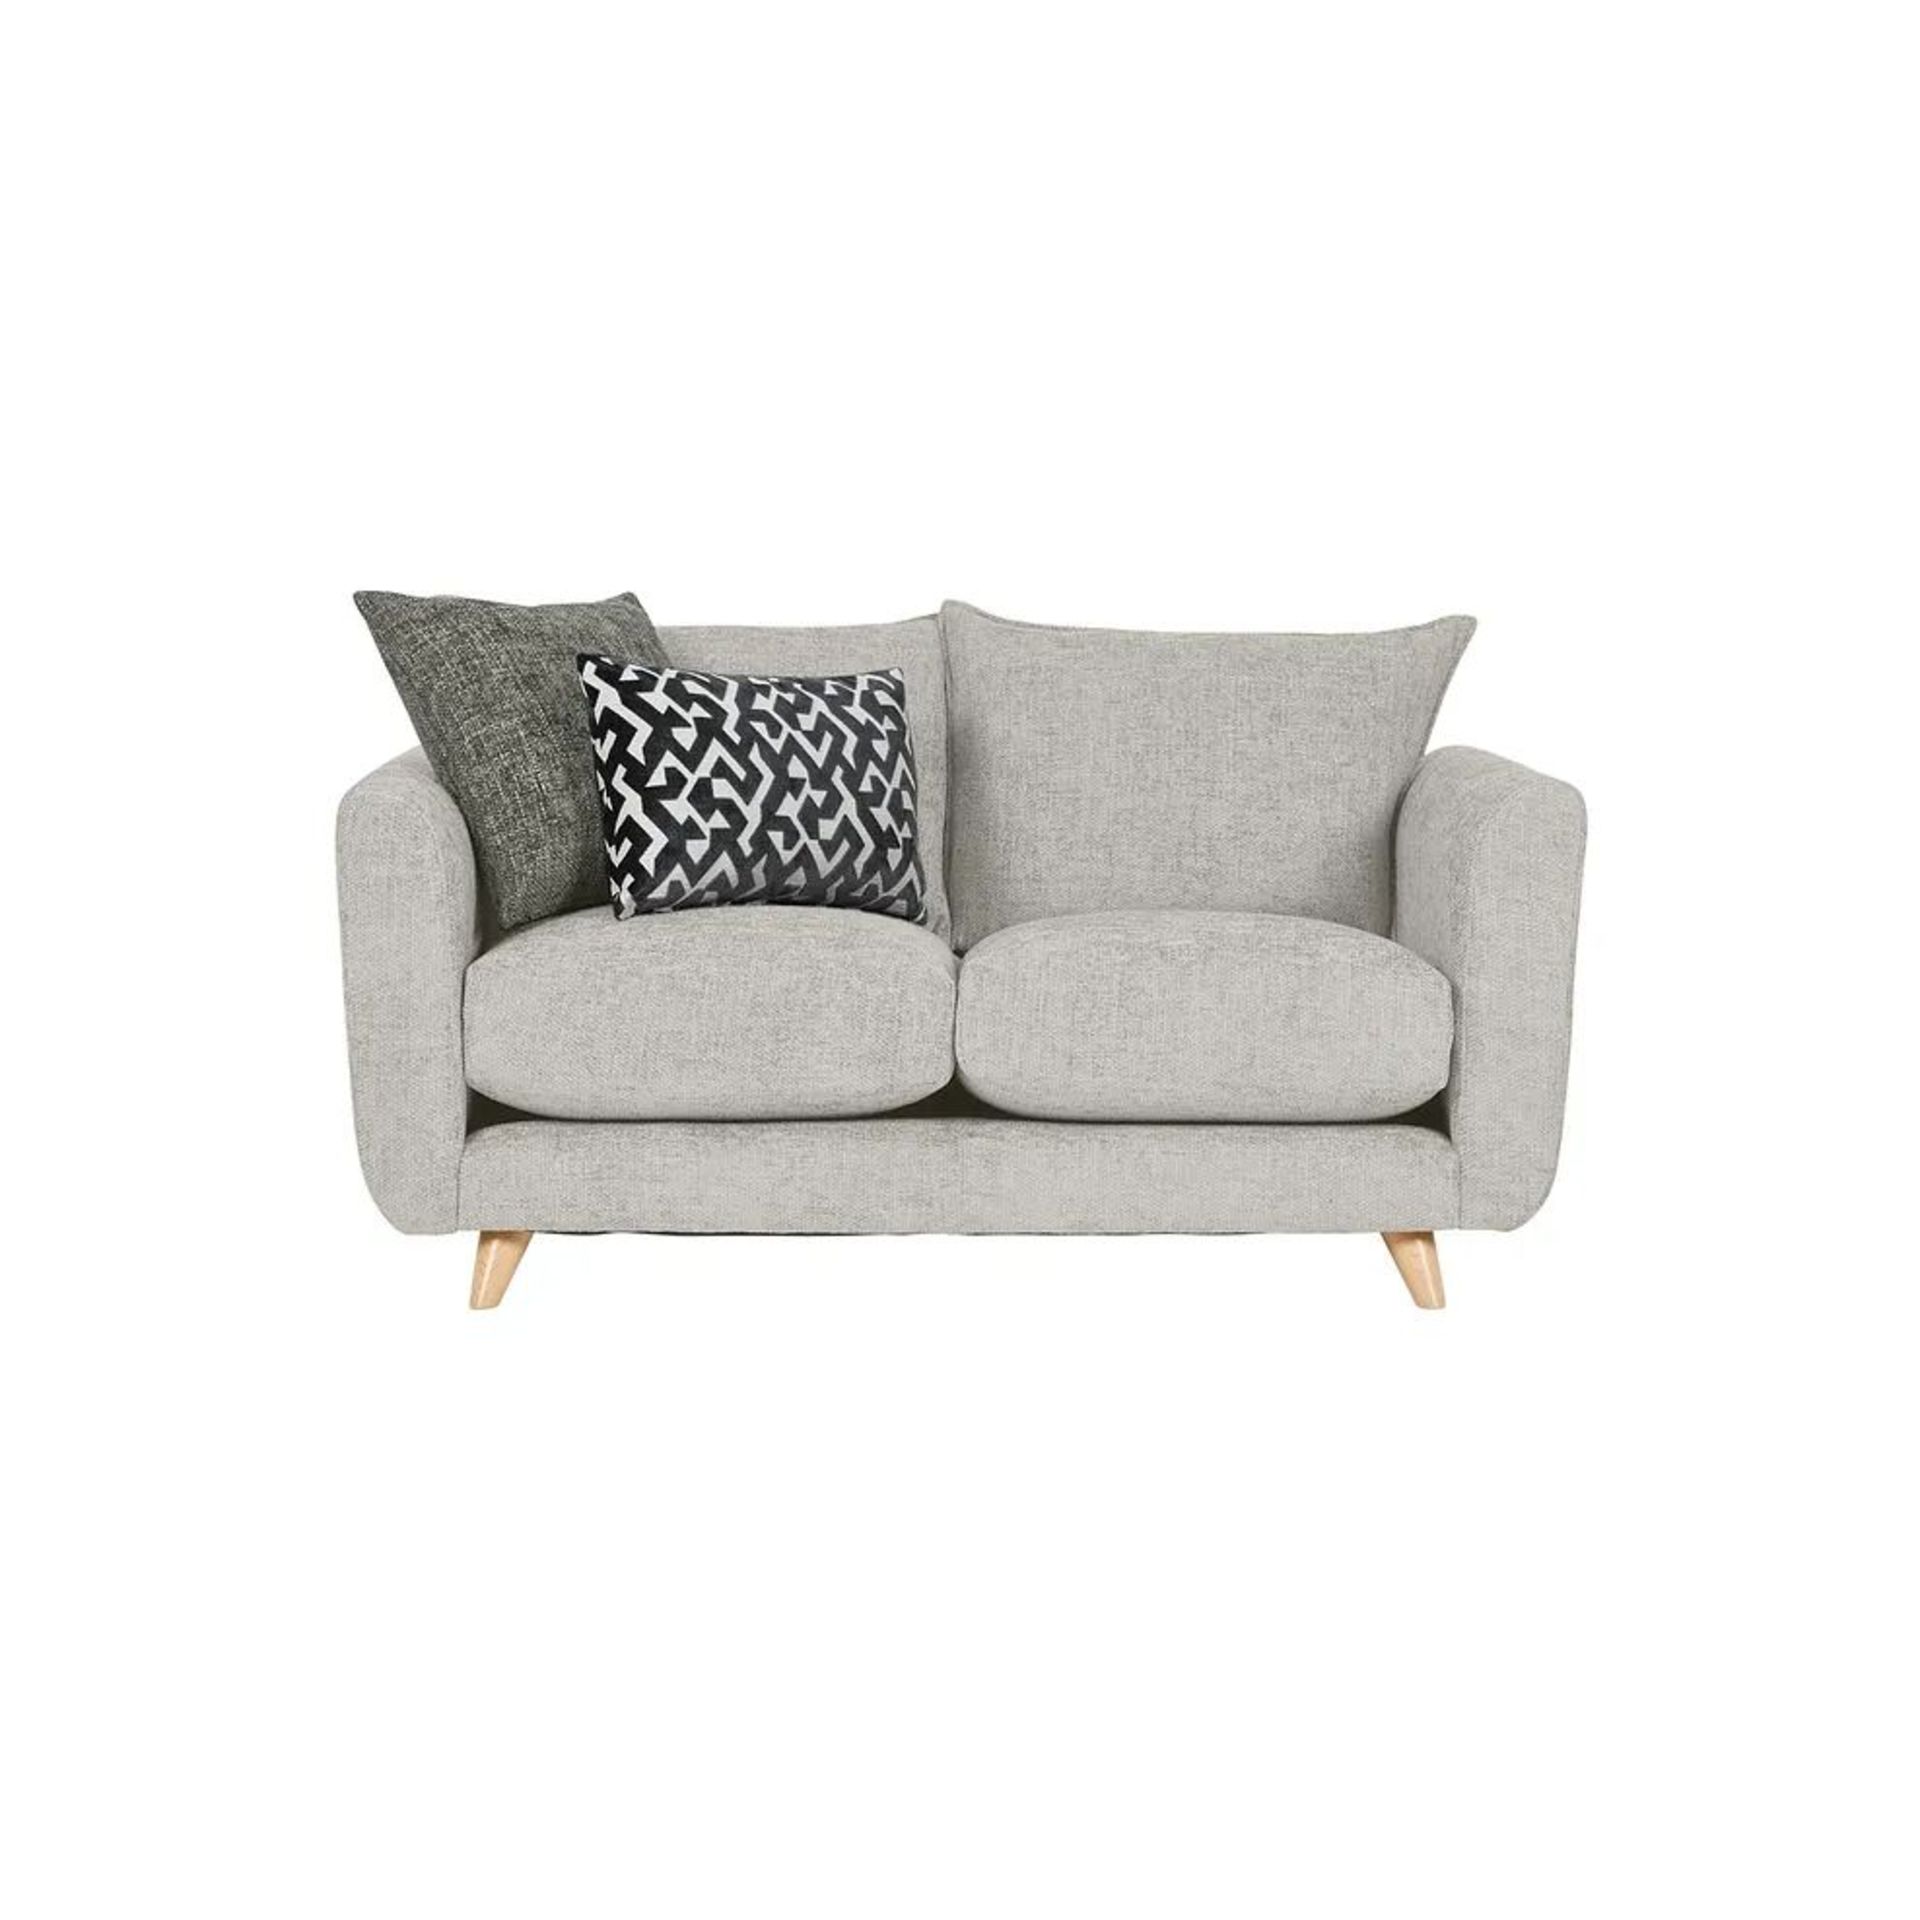 BRAND NEW DALBY 2 Seater Sofa - SILVER FABRIC. RRP £1569. Our Dalby 2-seater sofa, shown here in - Image 2 of 8